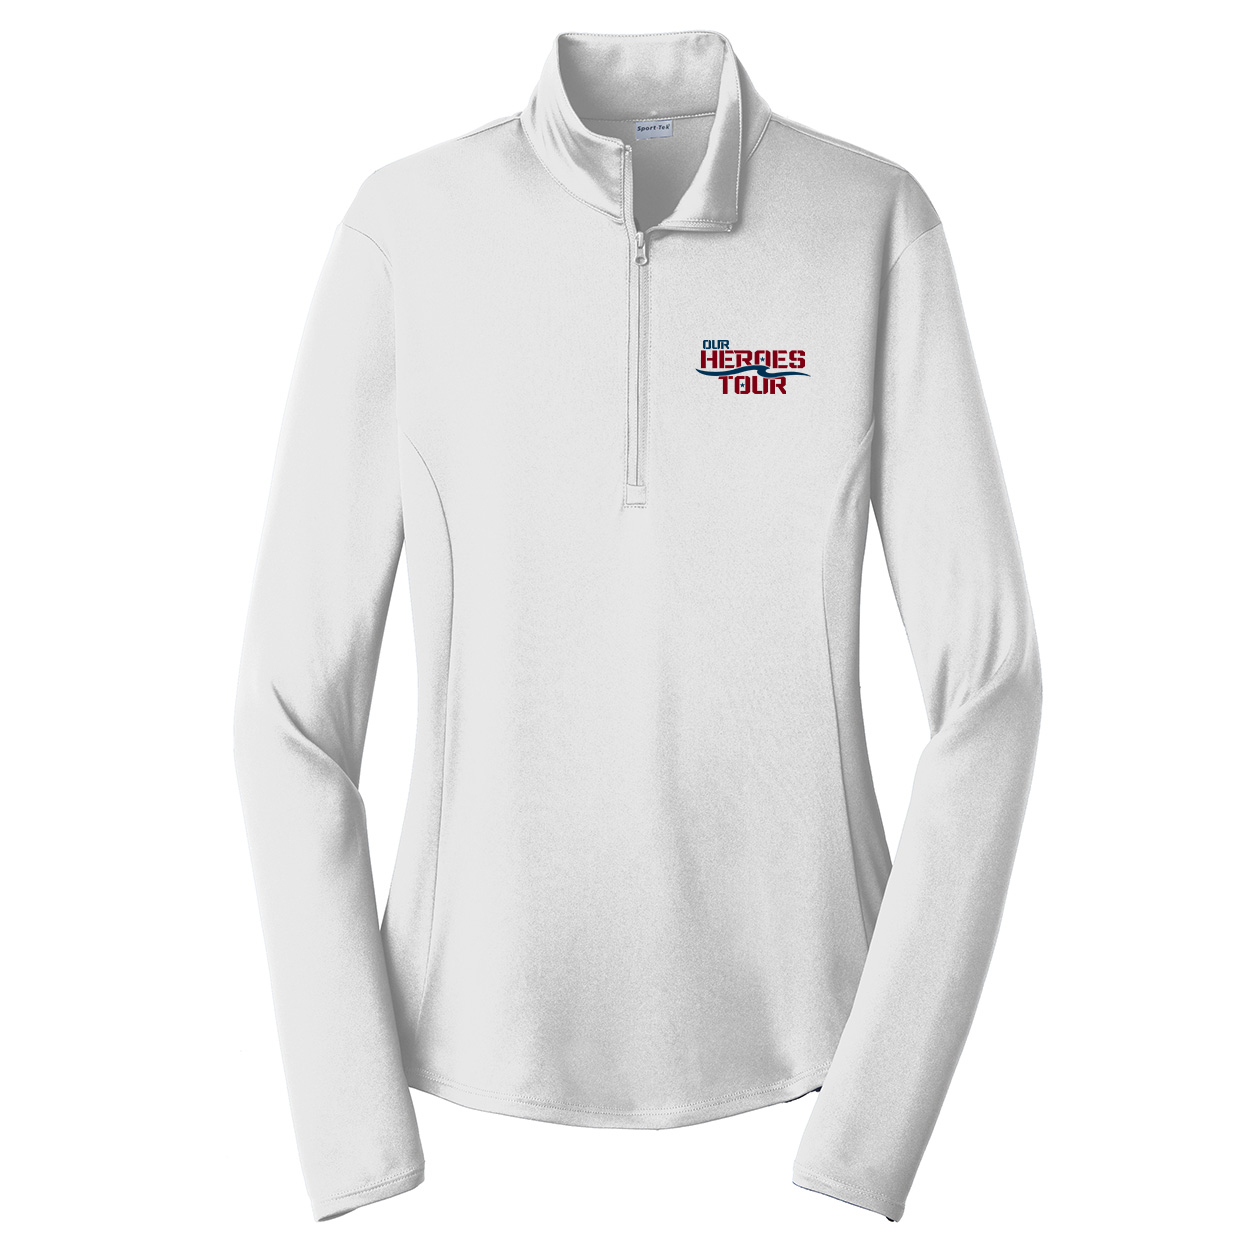 Our Heroes Tour Womens Night Out Premium Quarter-Zip Pullover Long Sleeve Shirt White (White Logo)